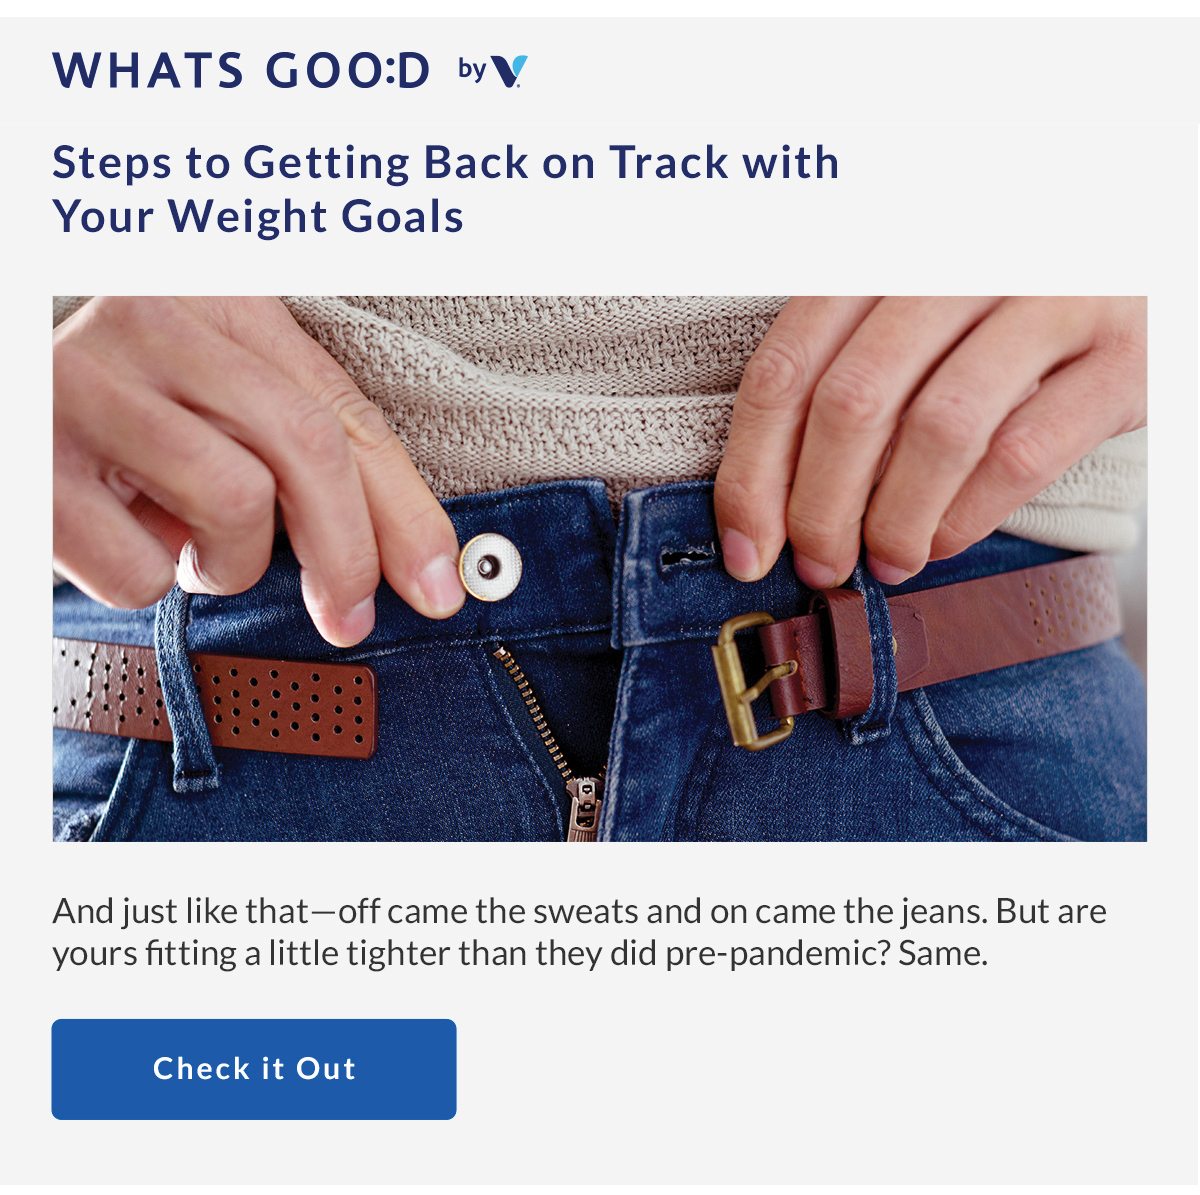 Steps To Getting Back On Track With Your Weight Goals